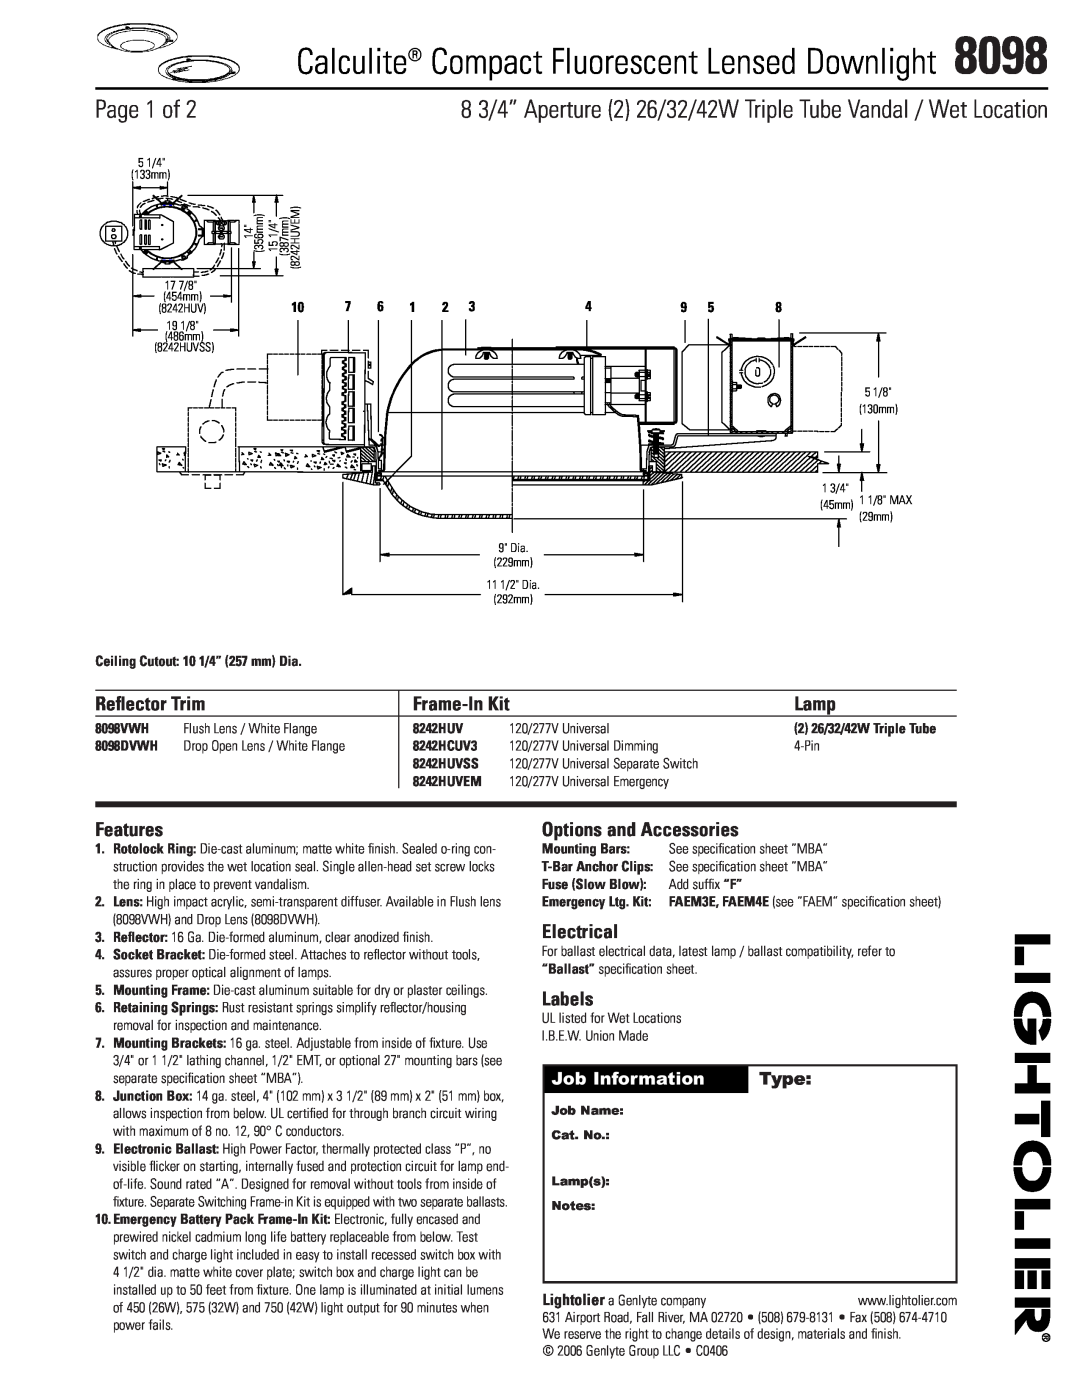 Lightolier 8098 specifications Job Information, Type, Calculite Compact Fluorescent Lensed Downlight, Page 1 of, Lamp 